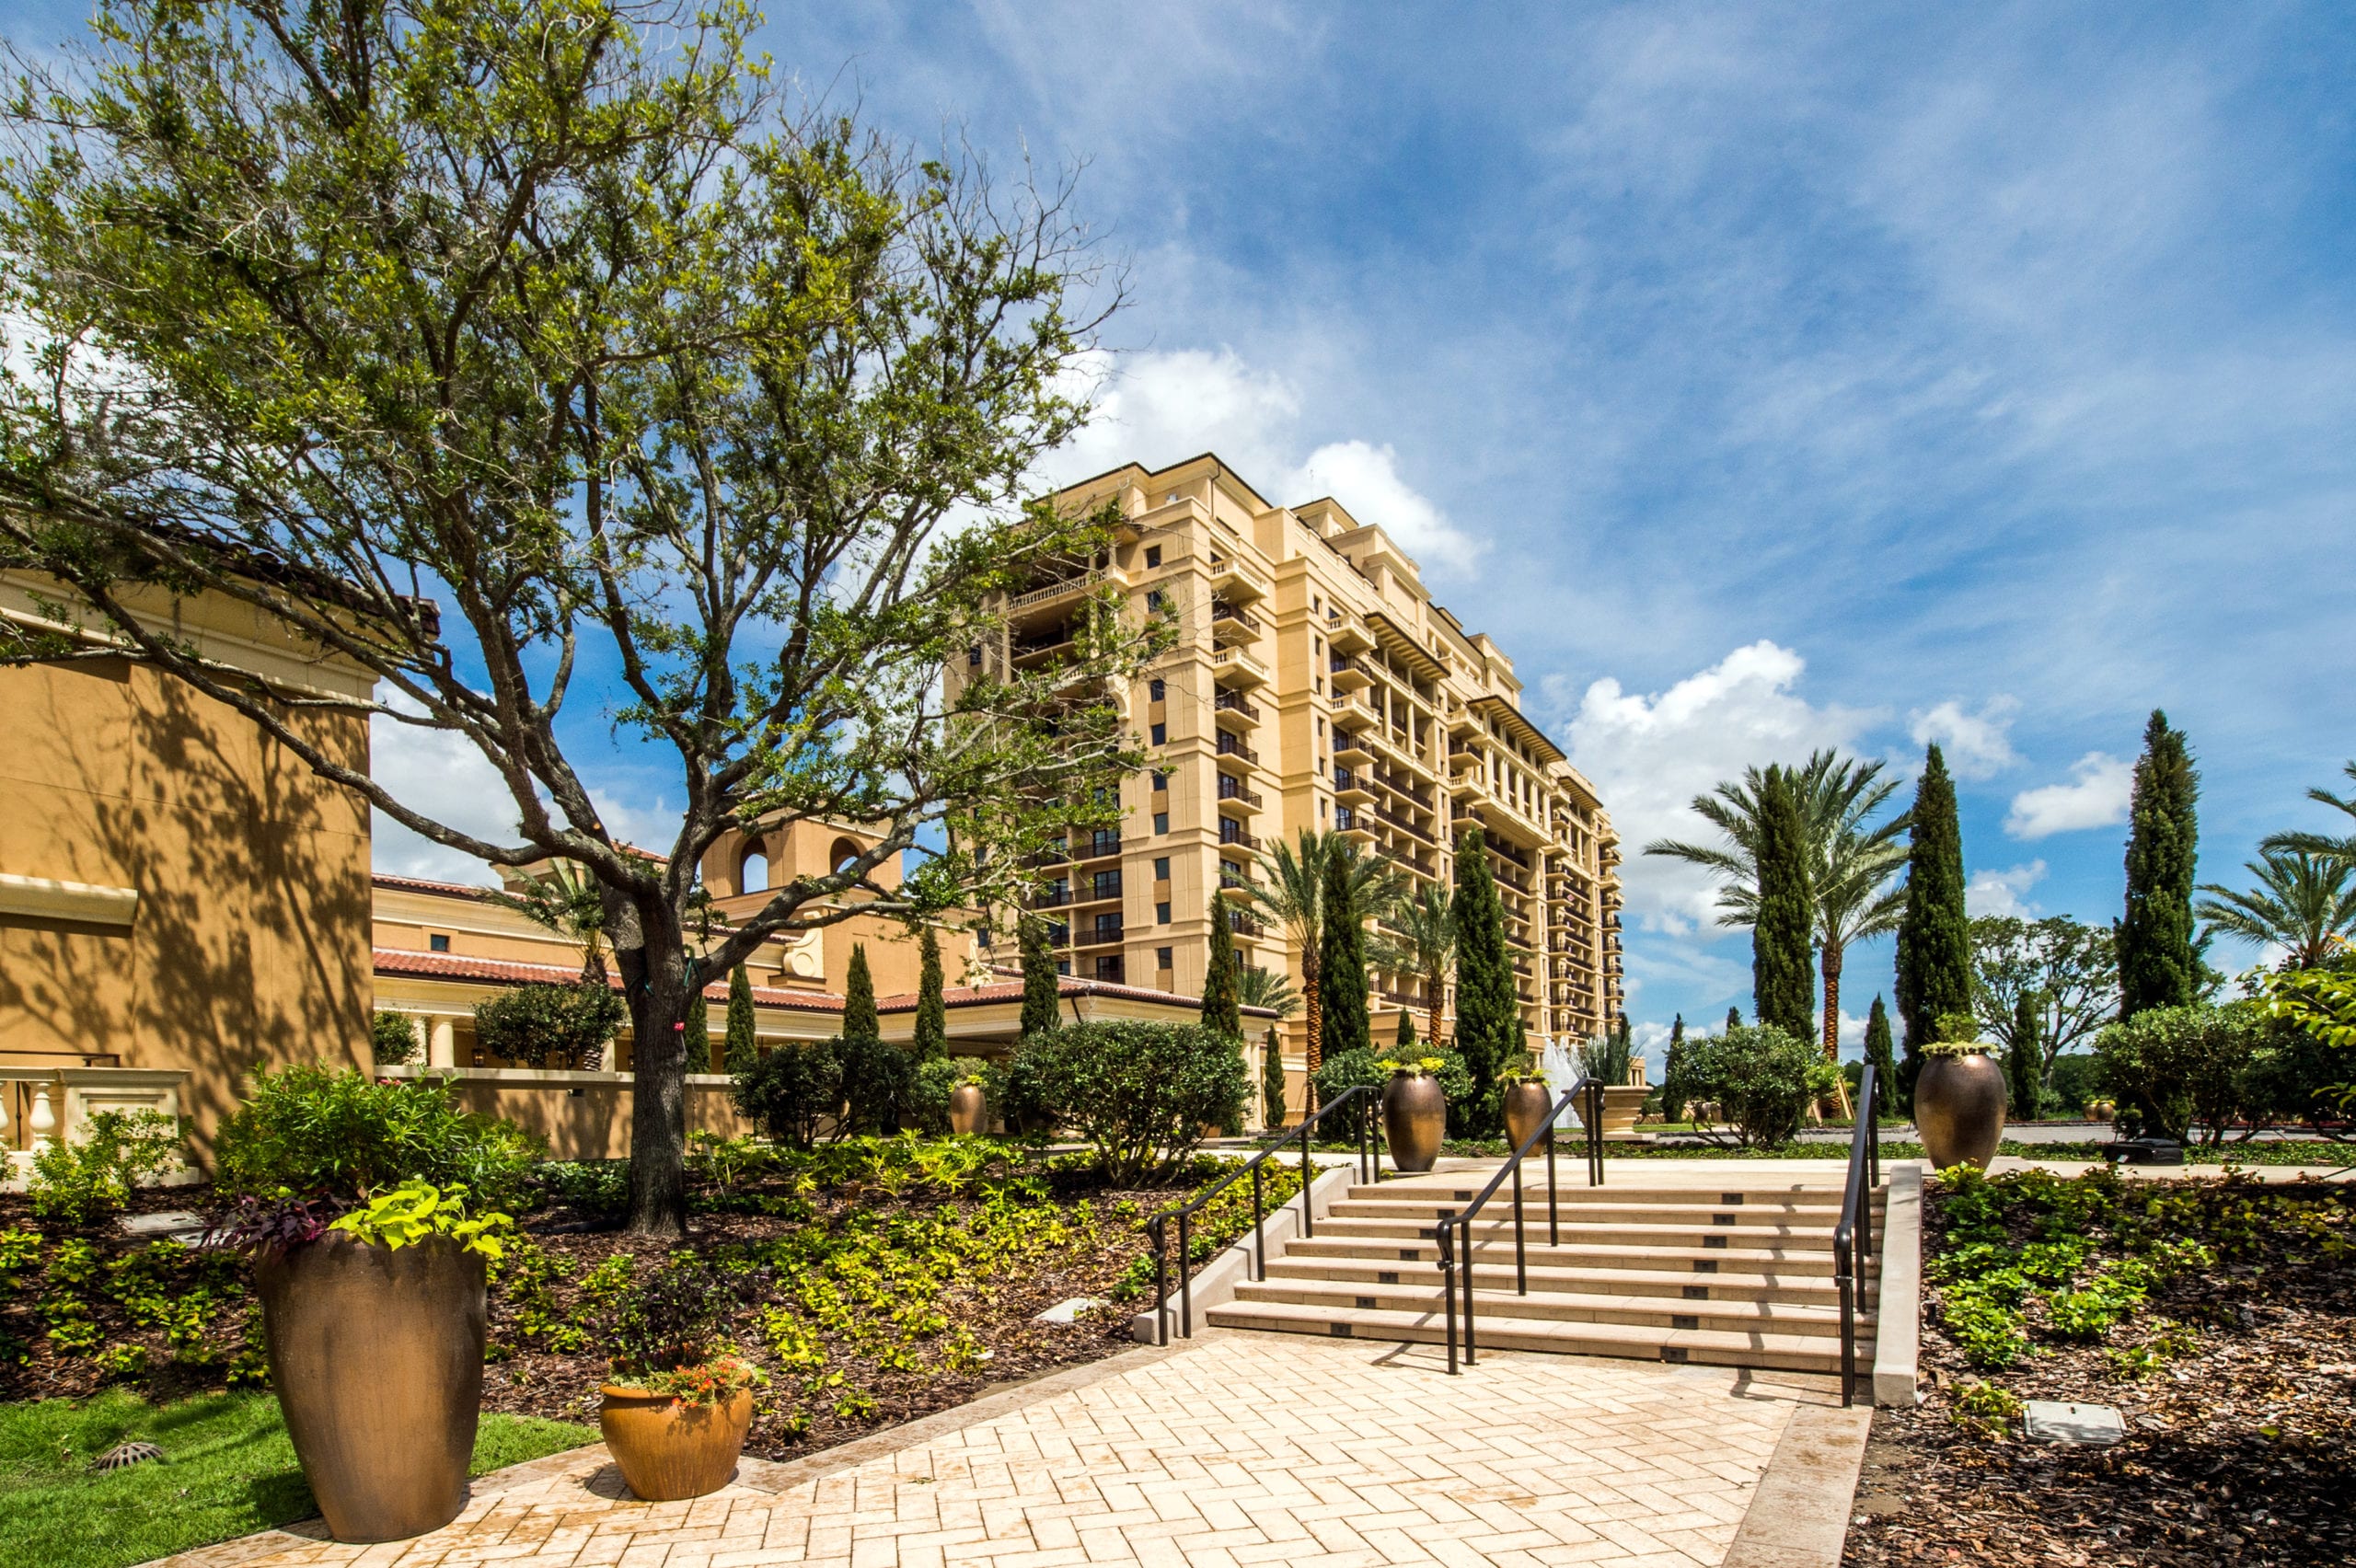 Four Seasons Building by park with stairs with trees and palm trees under blue cloudy skies